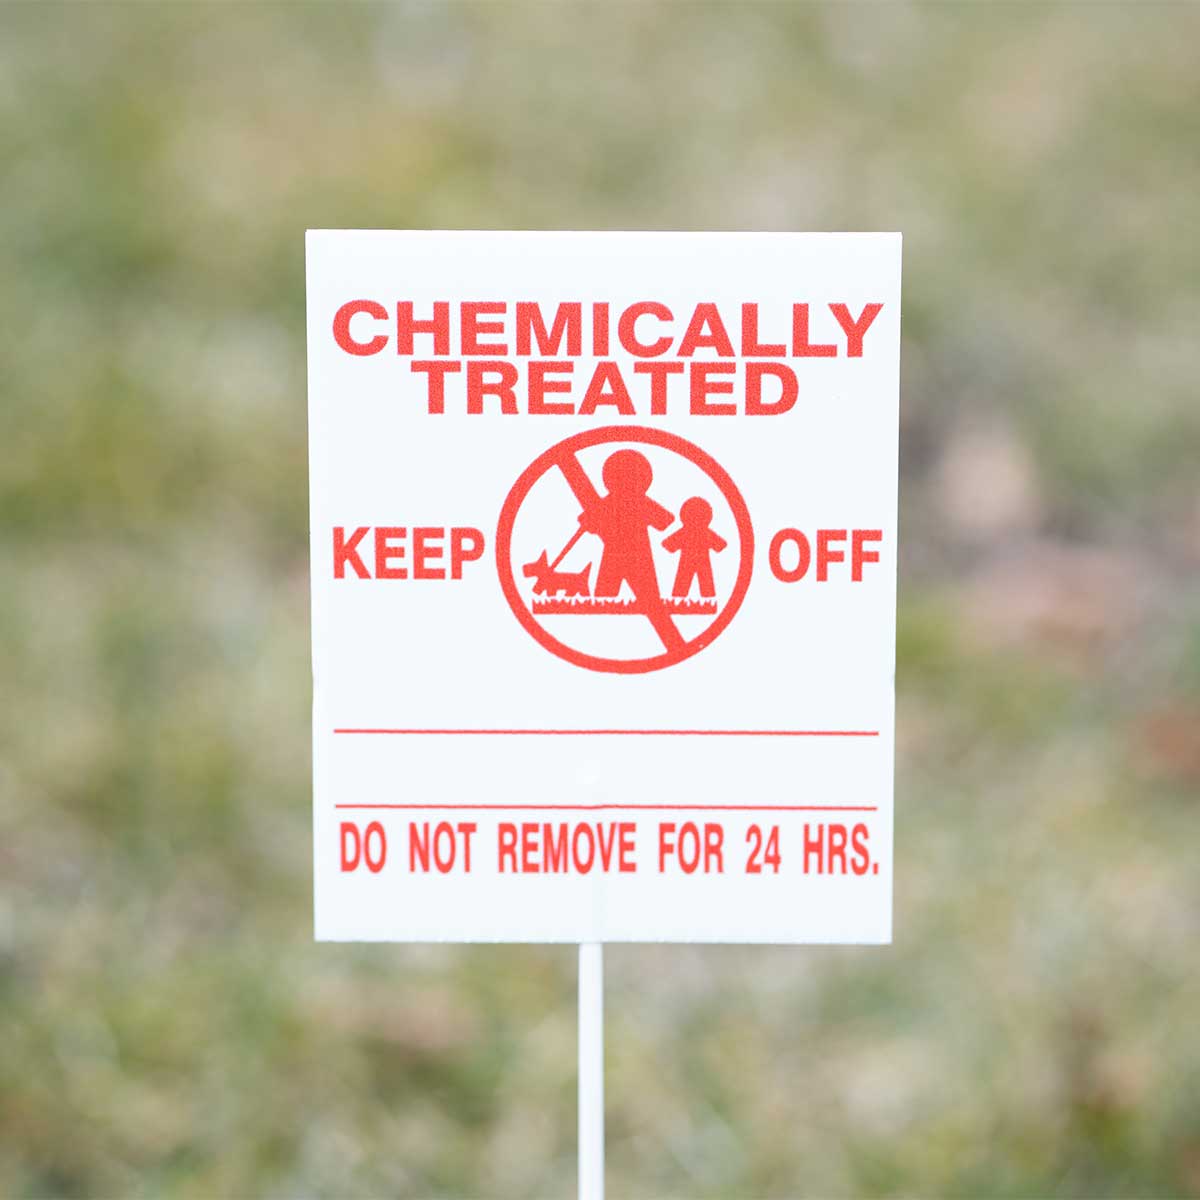 Gemplers Iowa Lawn Pesticide Application Signs